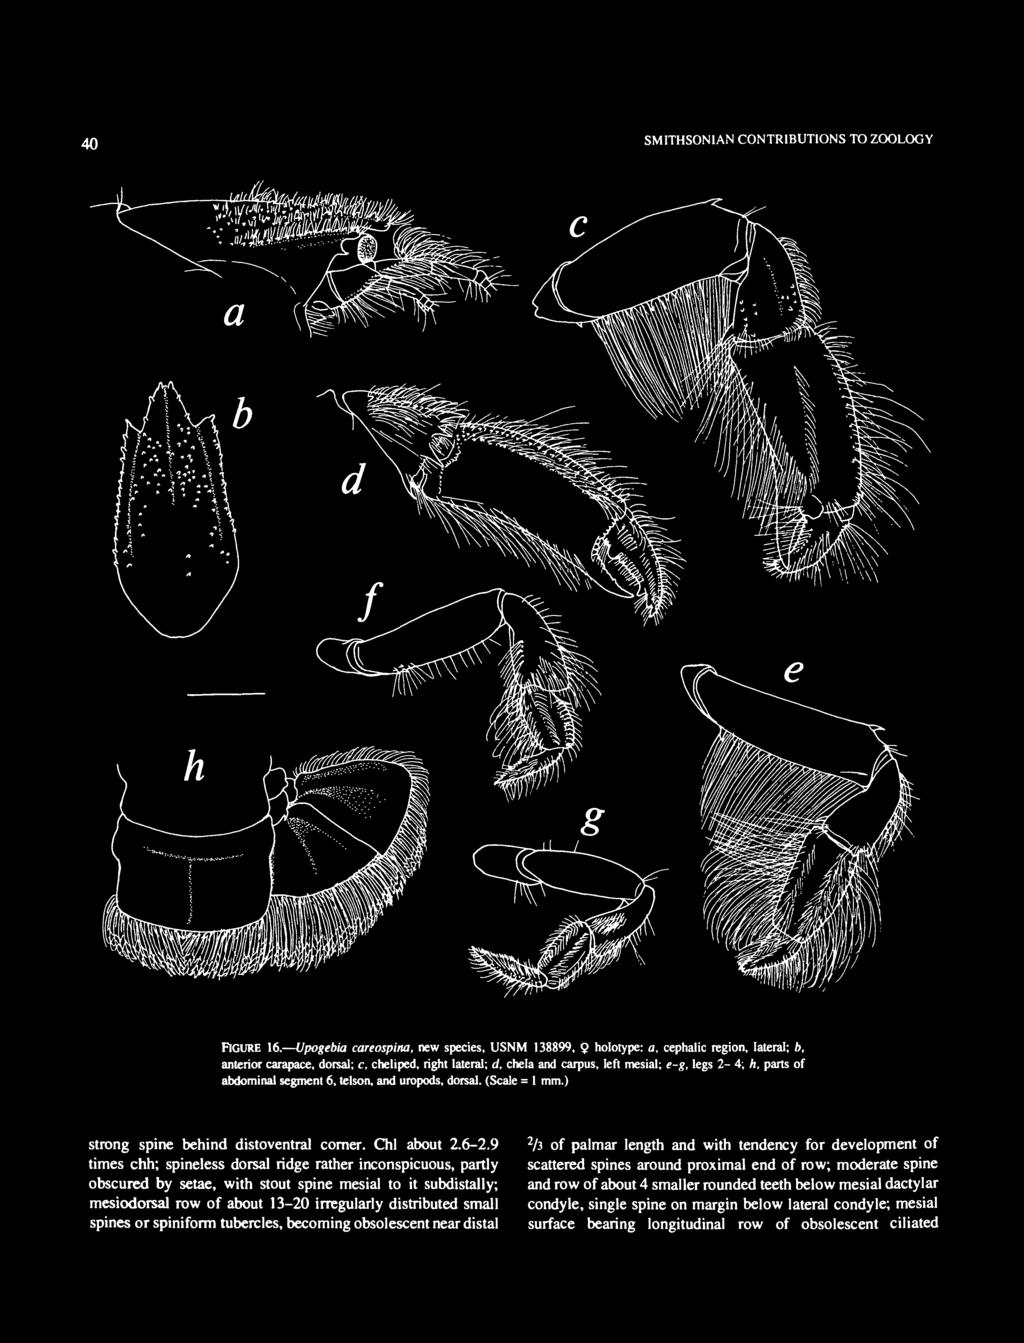 9 times chh; spineless dorsal ridge rather inconspicuous, partly obscured by setae, with stout spine mesial to it subdistally; mesiodorsal row of about 13-20 irregularly distributed small spines or